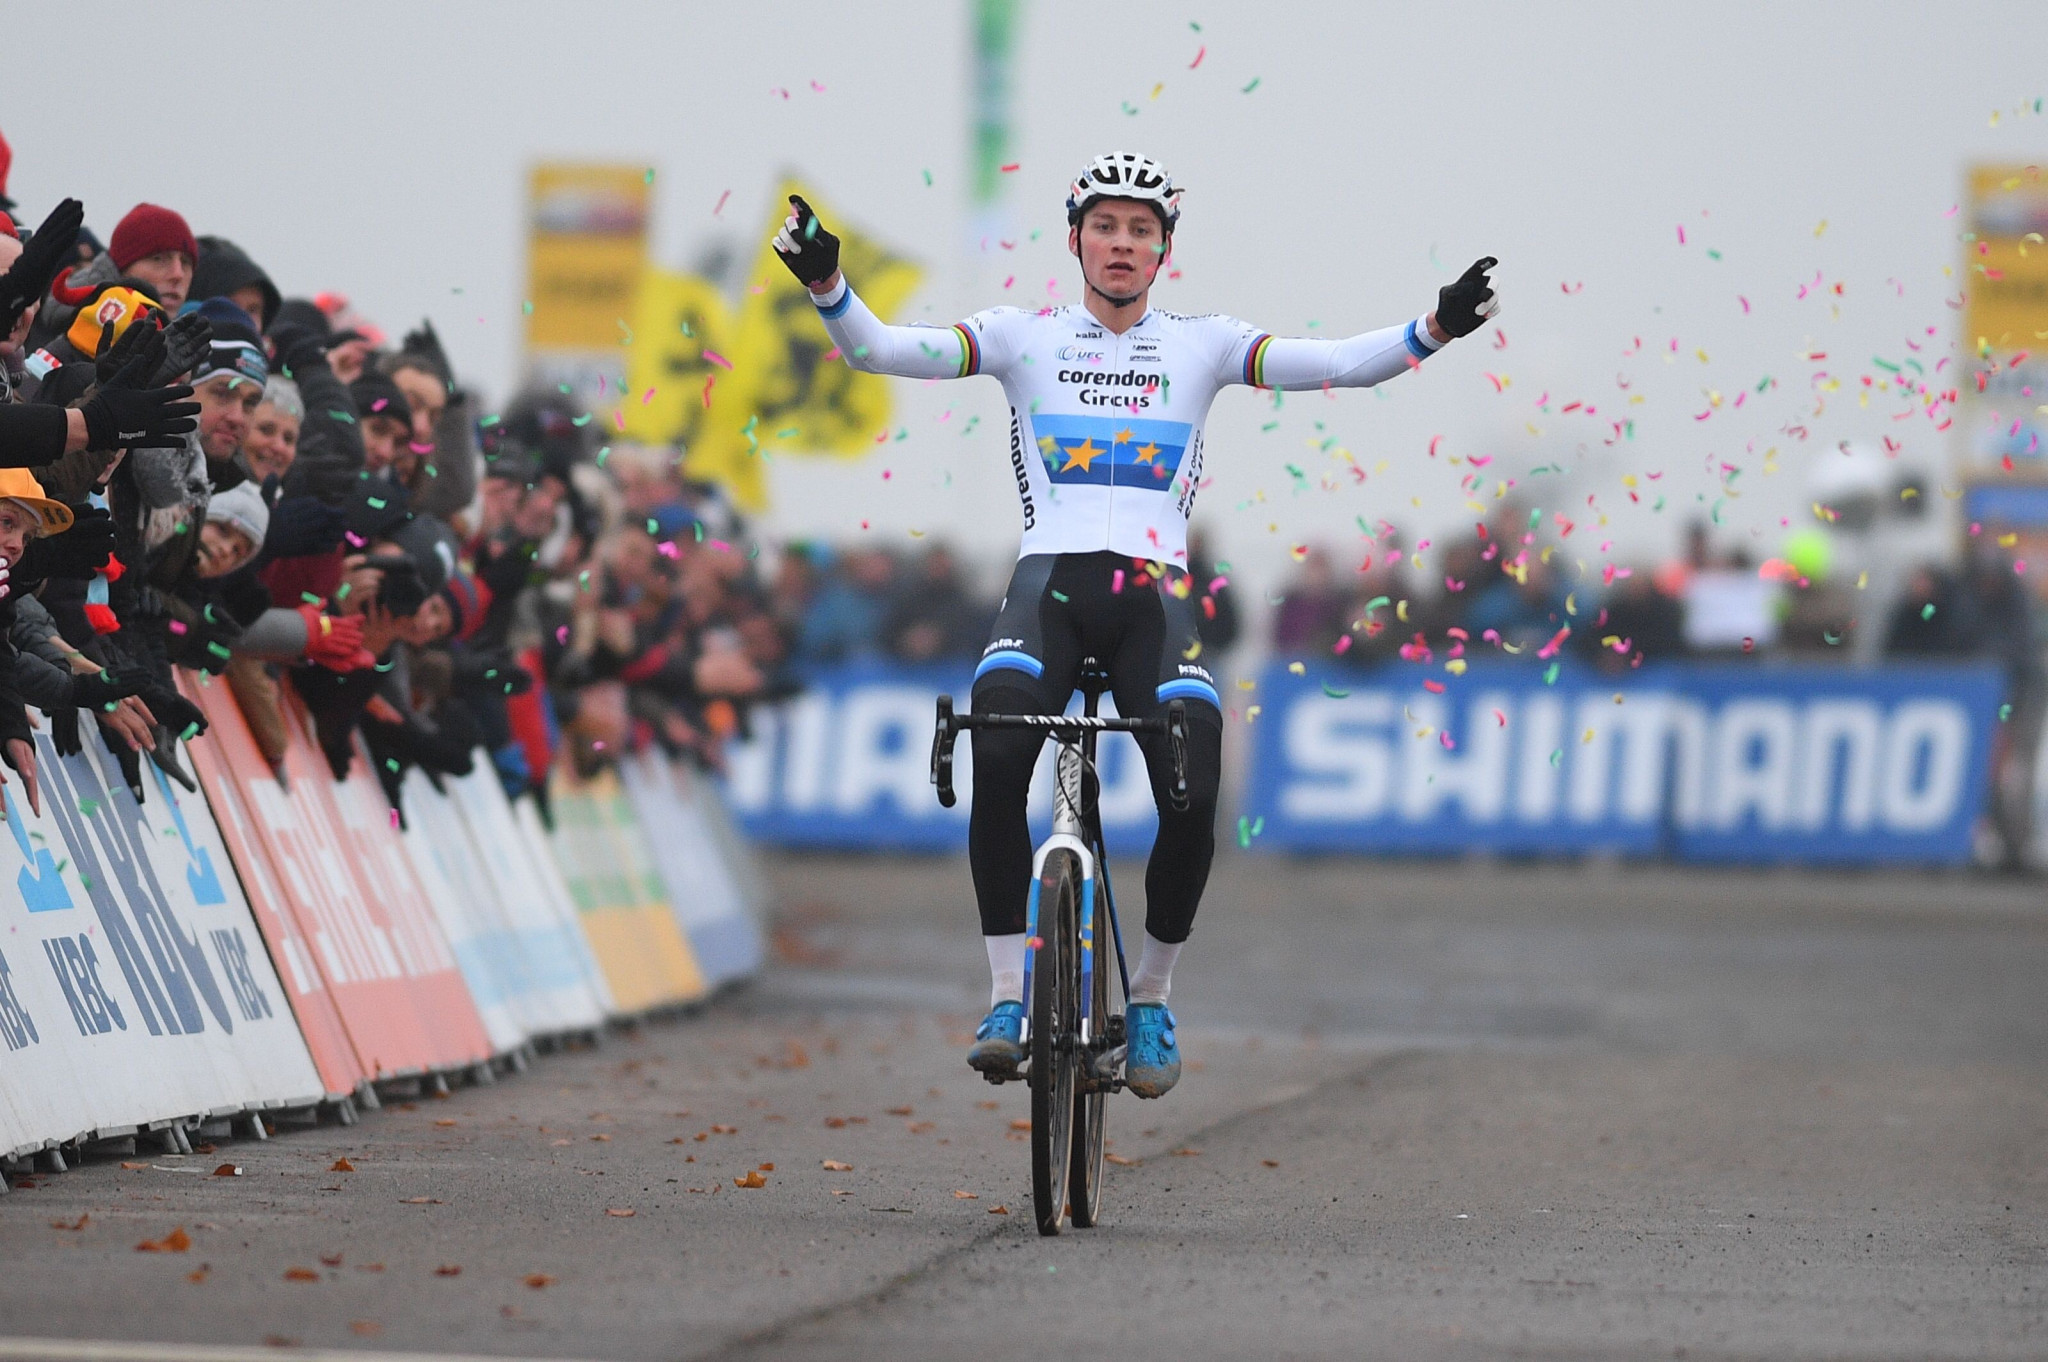 Mathieu van der Poel has won the last three World Cup events in a row ©Getty Images